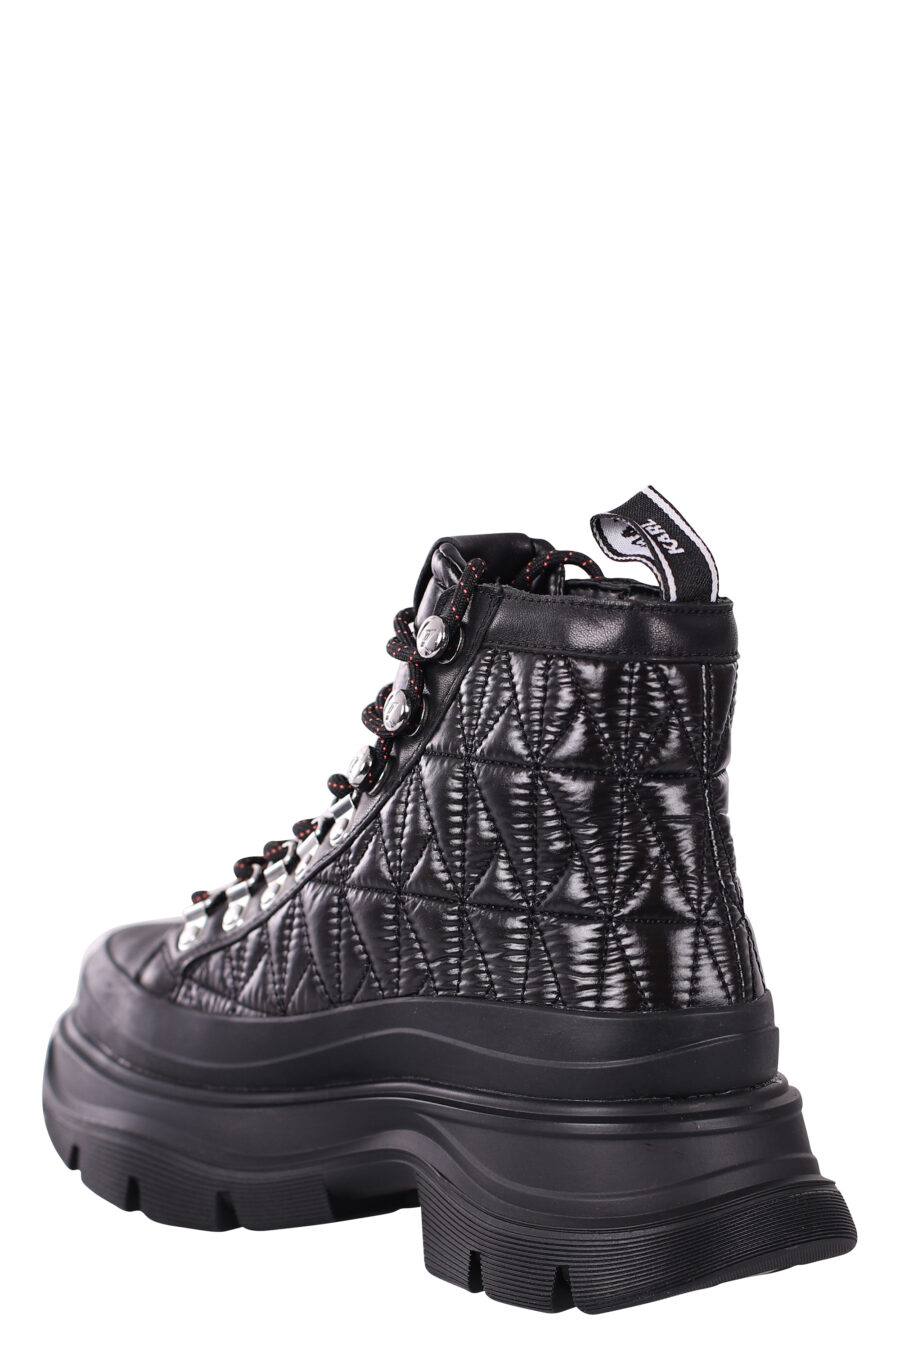 Black ankle boots with silver monogram logo and laces - IMG 5805